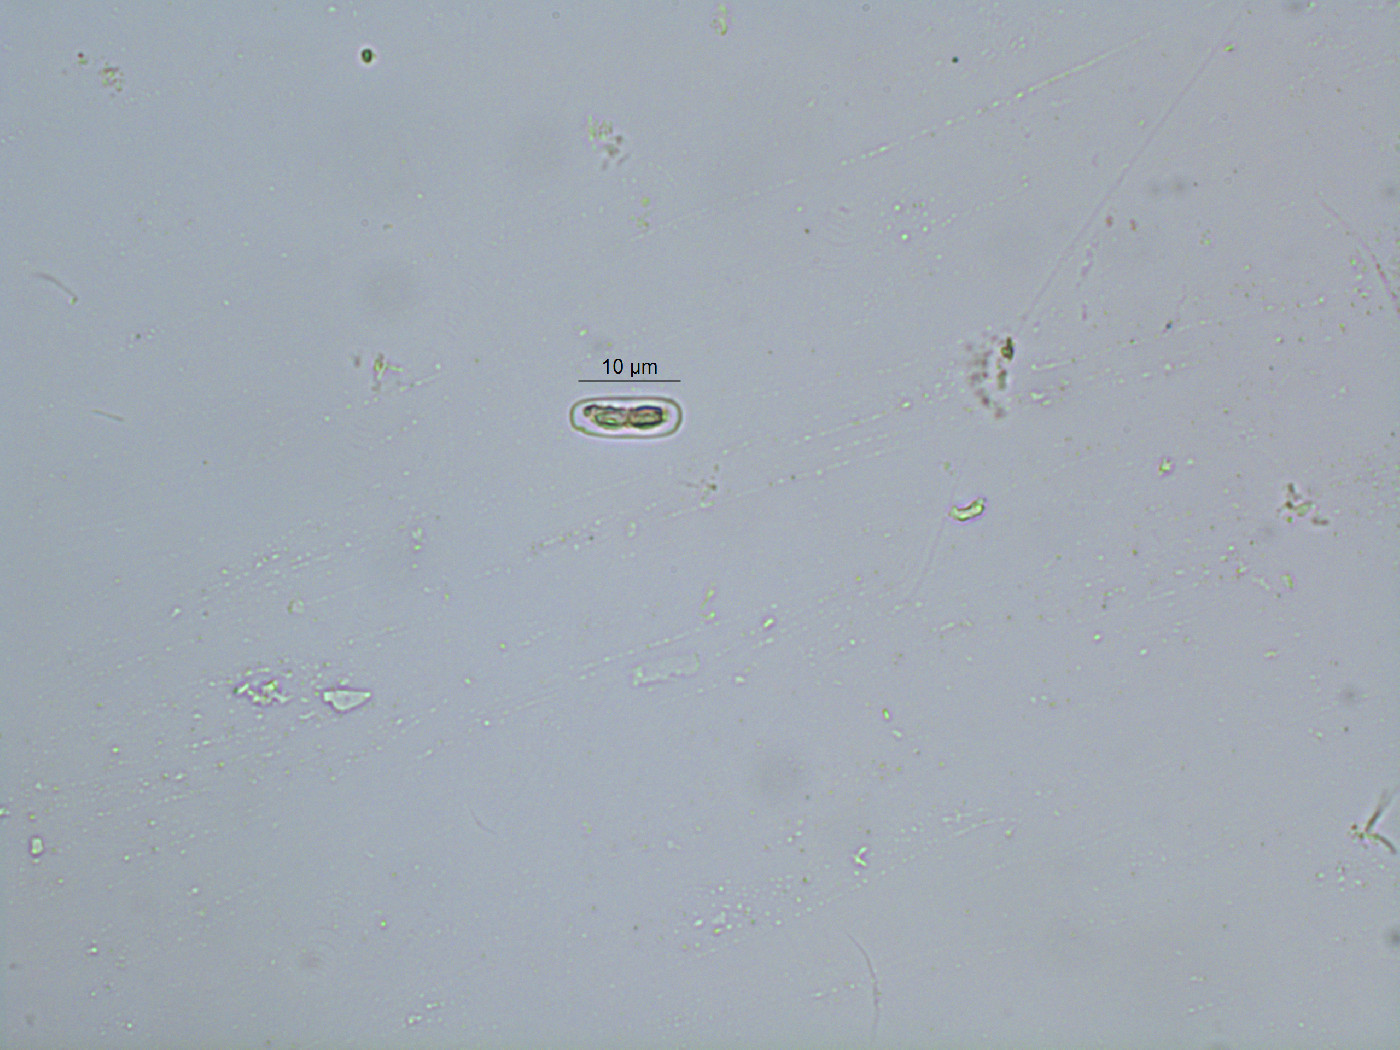 Cylindrocystis image